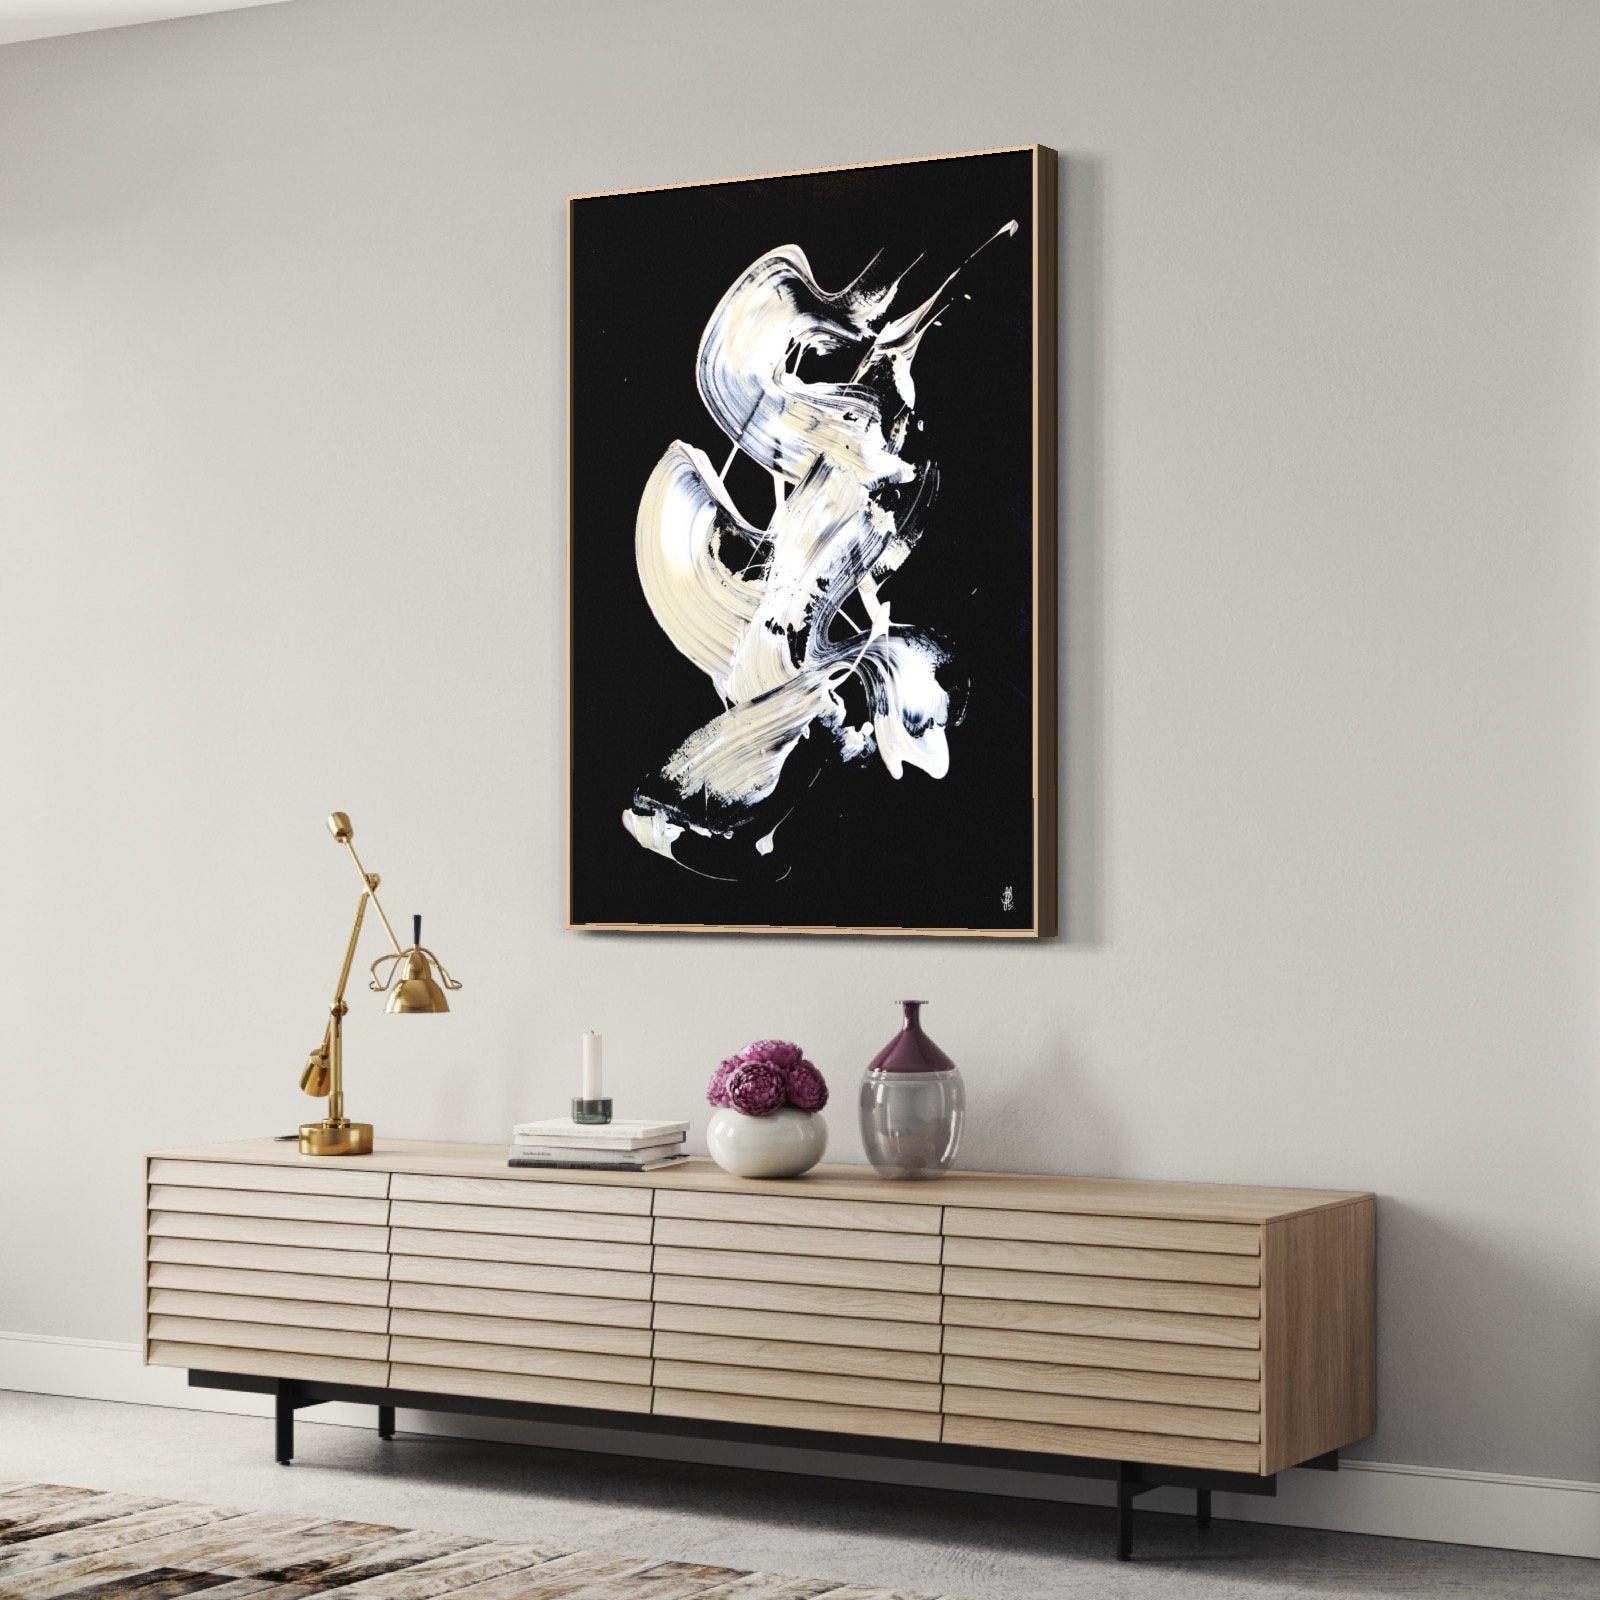 Canvas Print: "Less Is More #8"